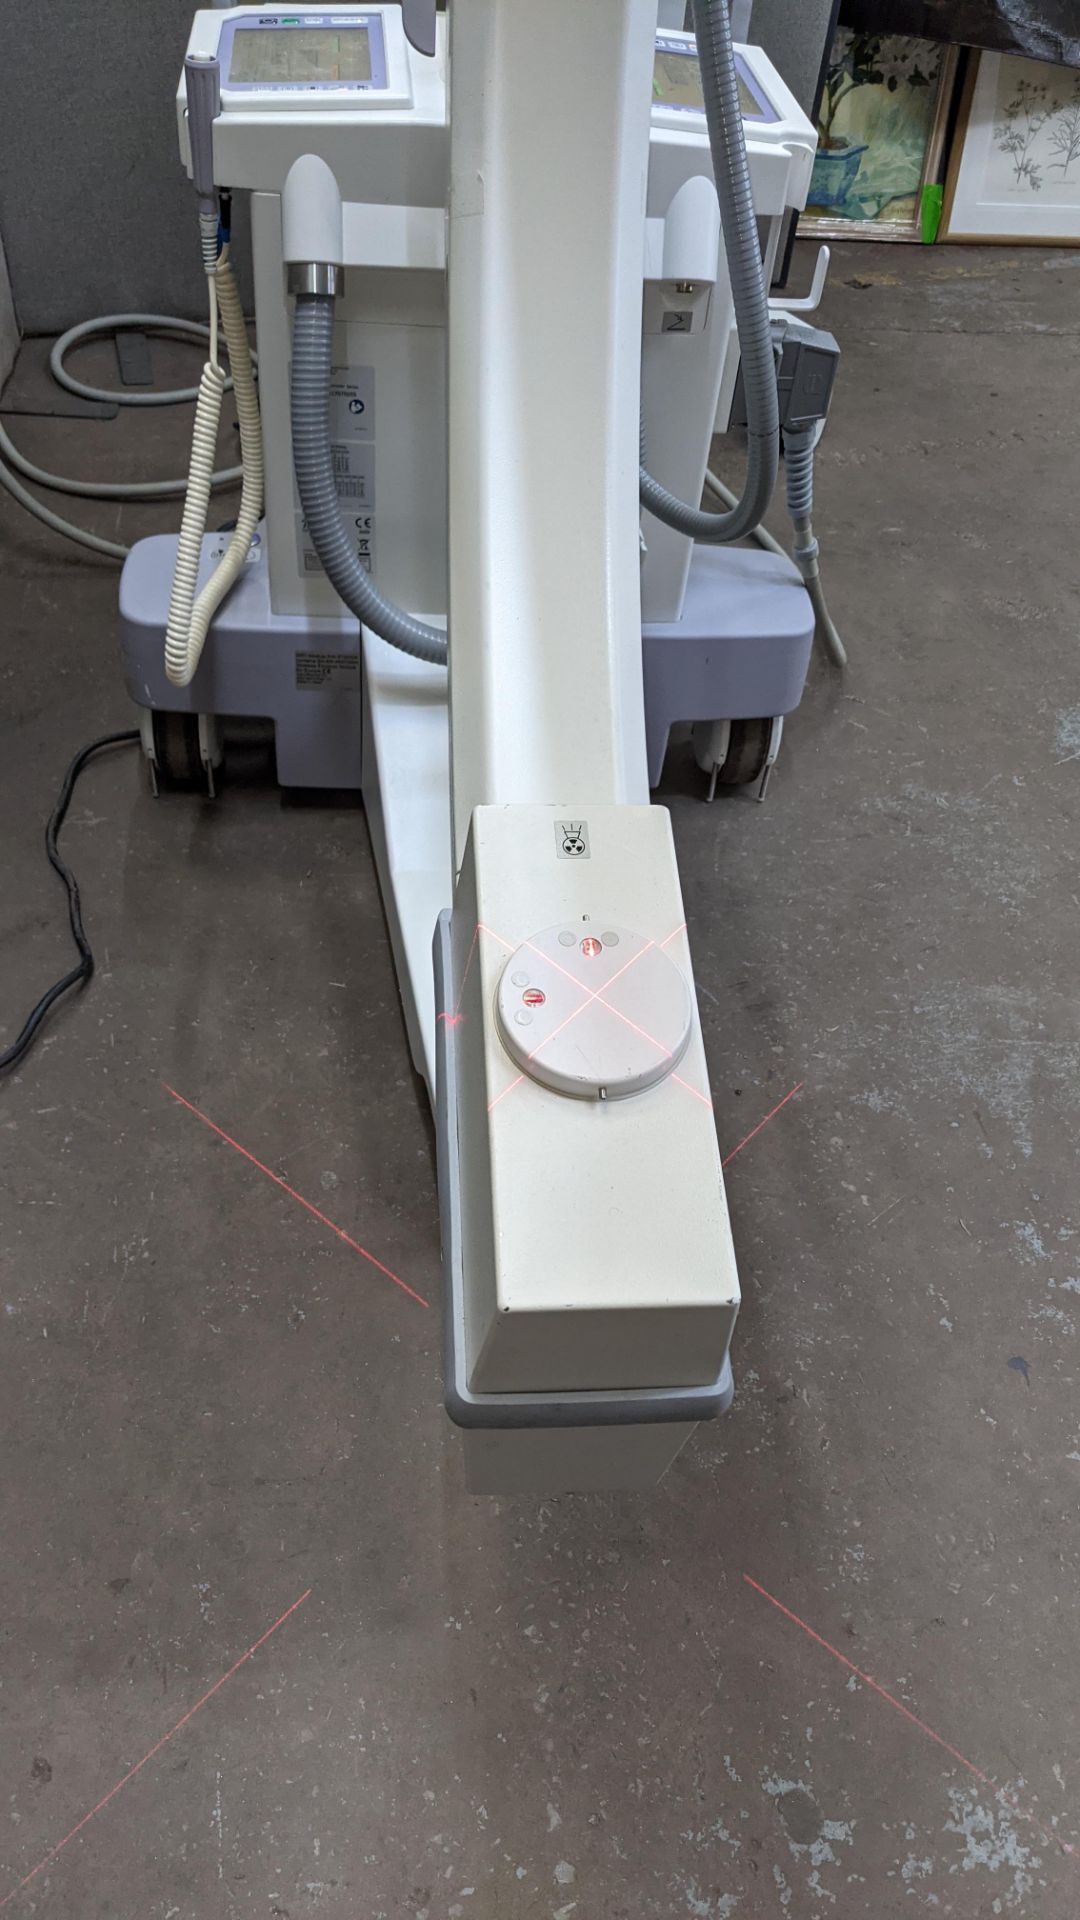 GE-OEC Fluorostar imaging system, purchased new in August 2017. EO4 Series. - Image 65 of 68